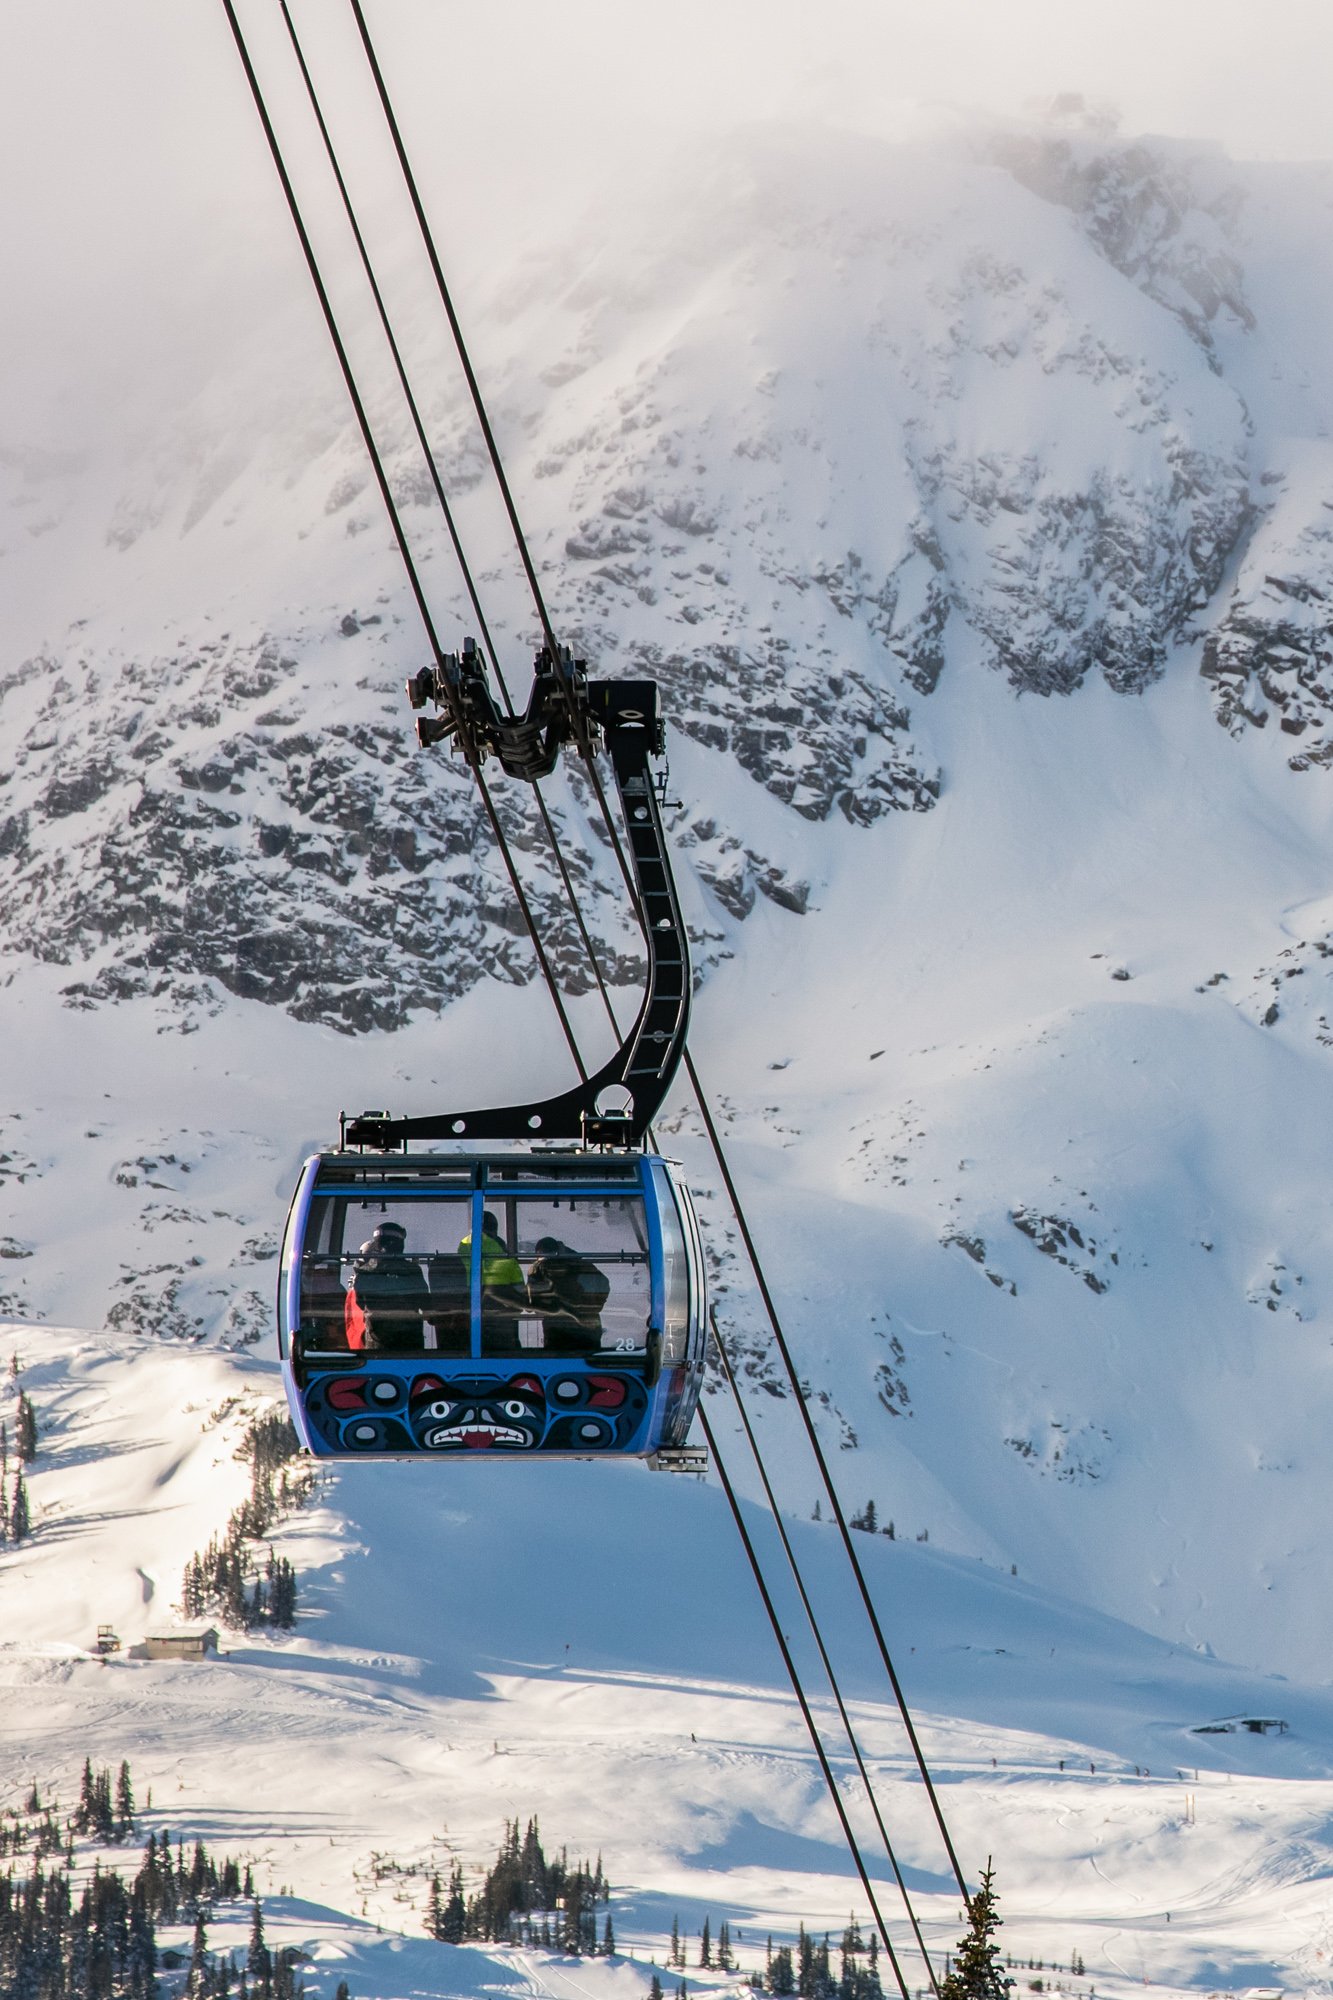 Whistler Blackcomb on X: We recently celebrated the 10 year anniversary of  the PEAK 2 PEAK Gondola with the Squamish Lil'Wat Cultural Centre by  unveiling 2 new wraps for the glass bottom